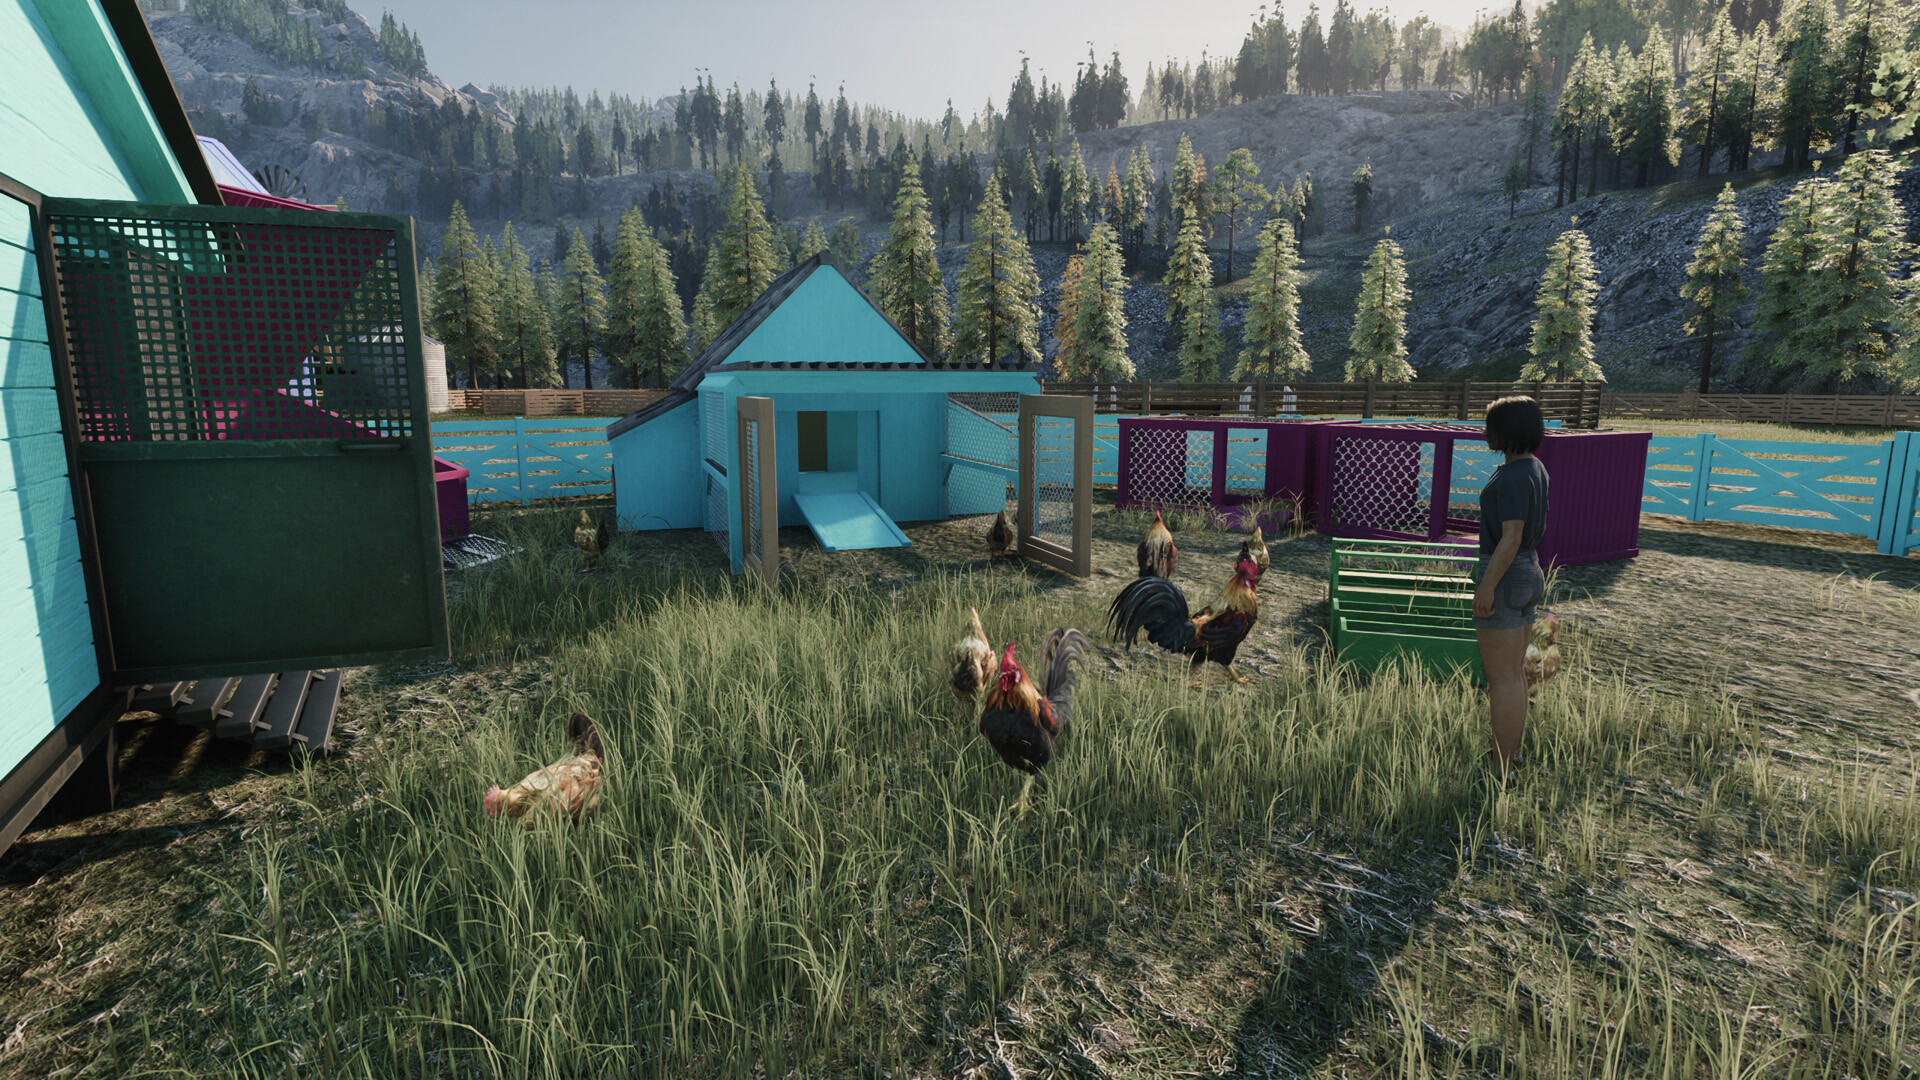 Ranch Simulator screenshots, images and pictures - Giant Bomb